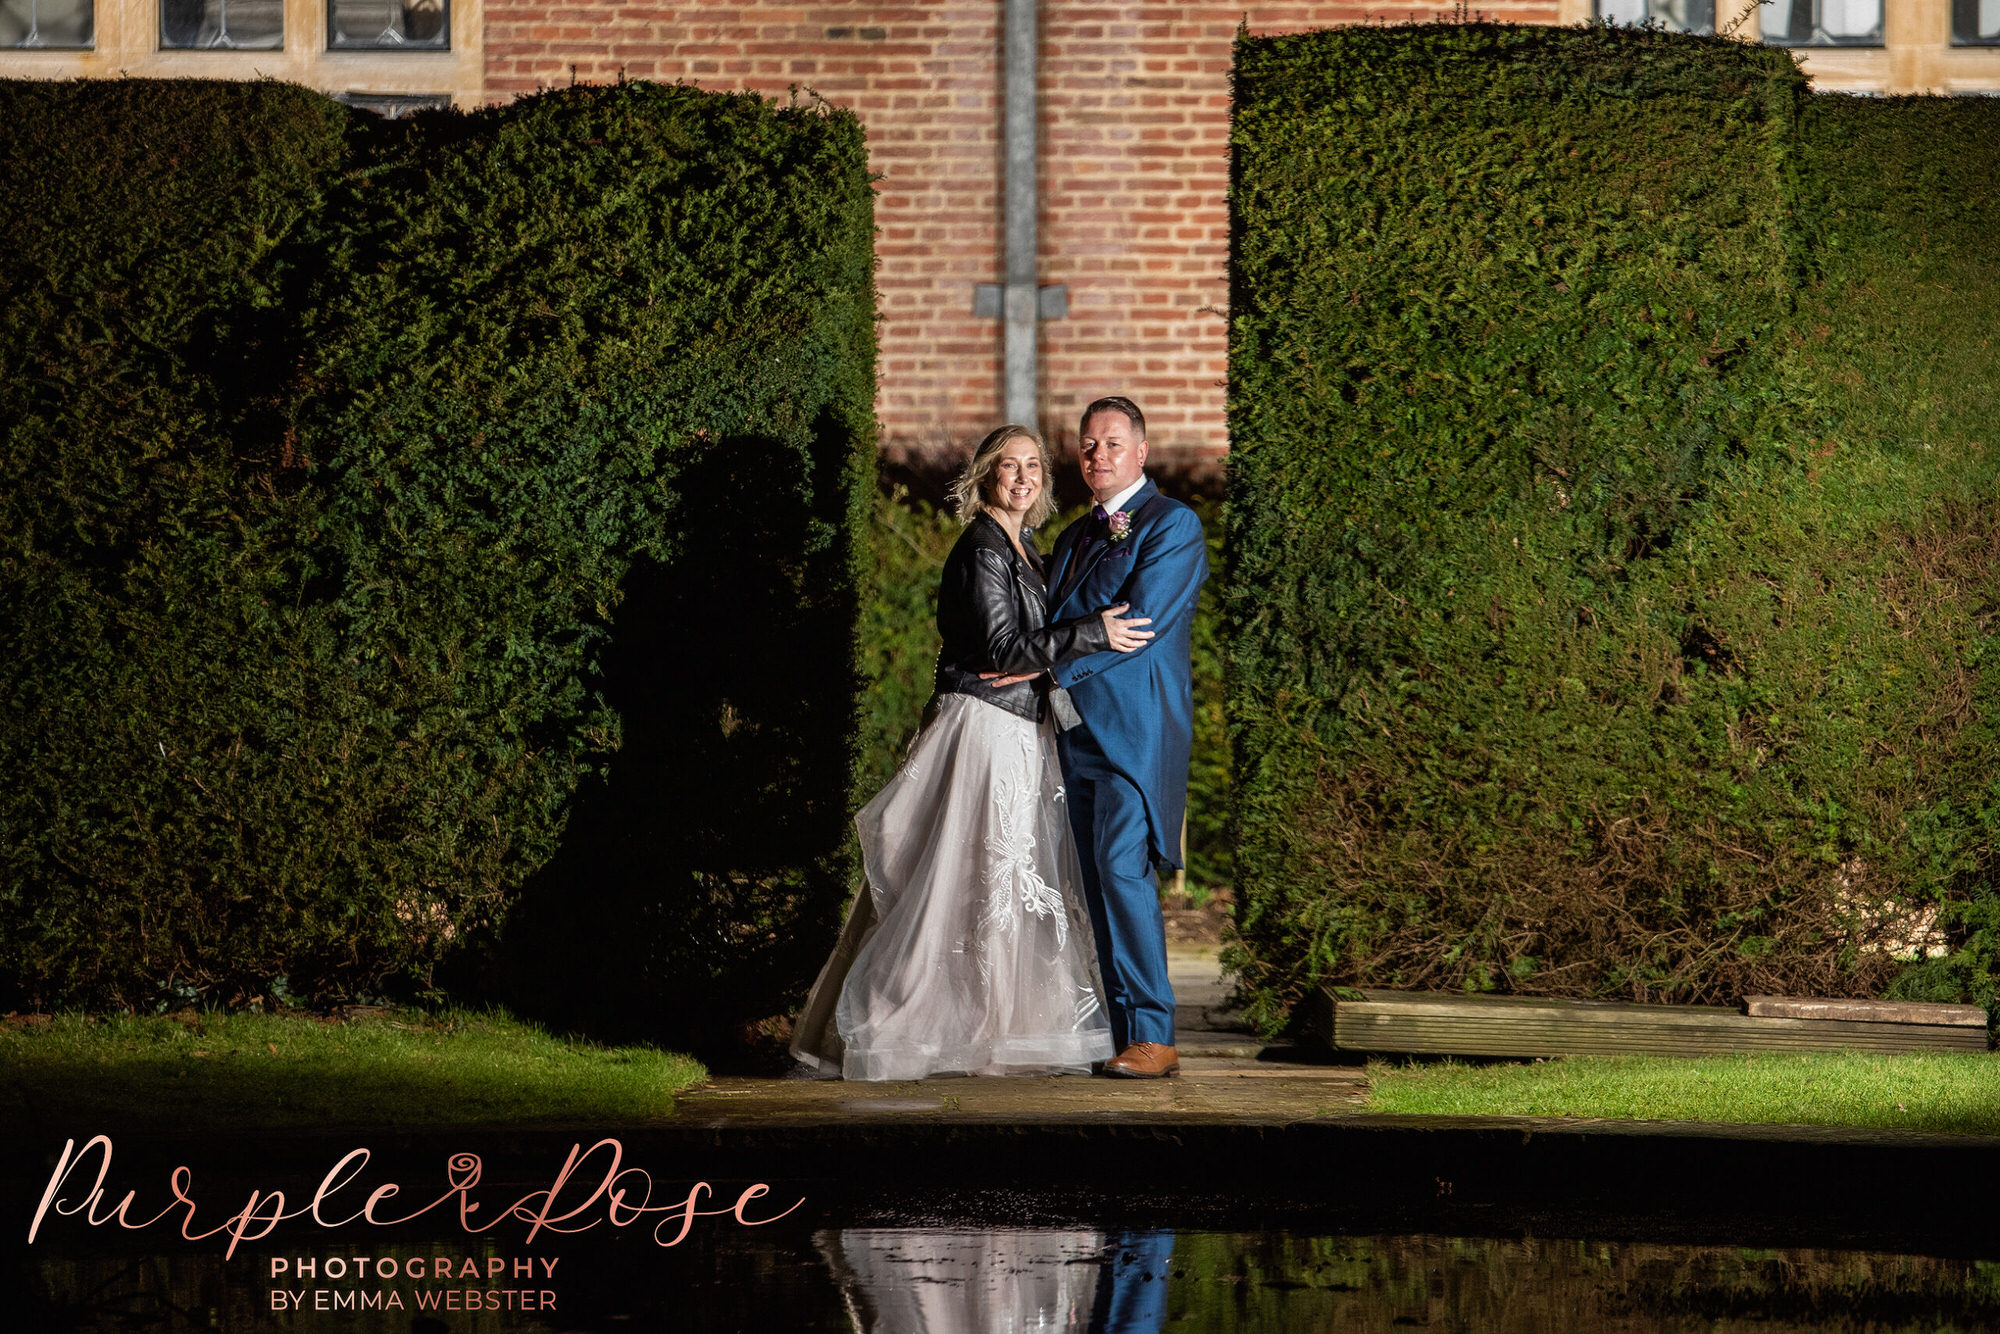 Bride and groom in front of a pond at night